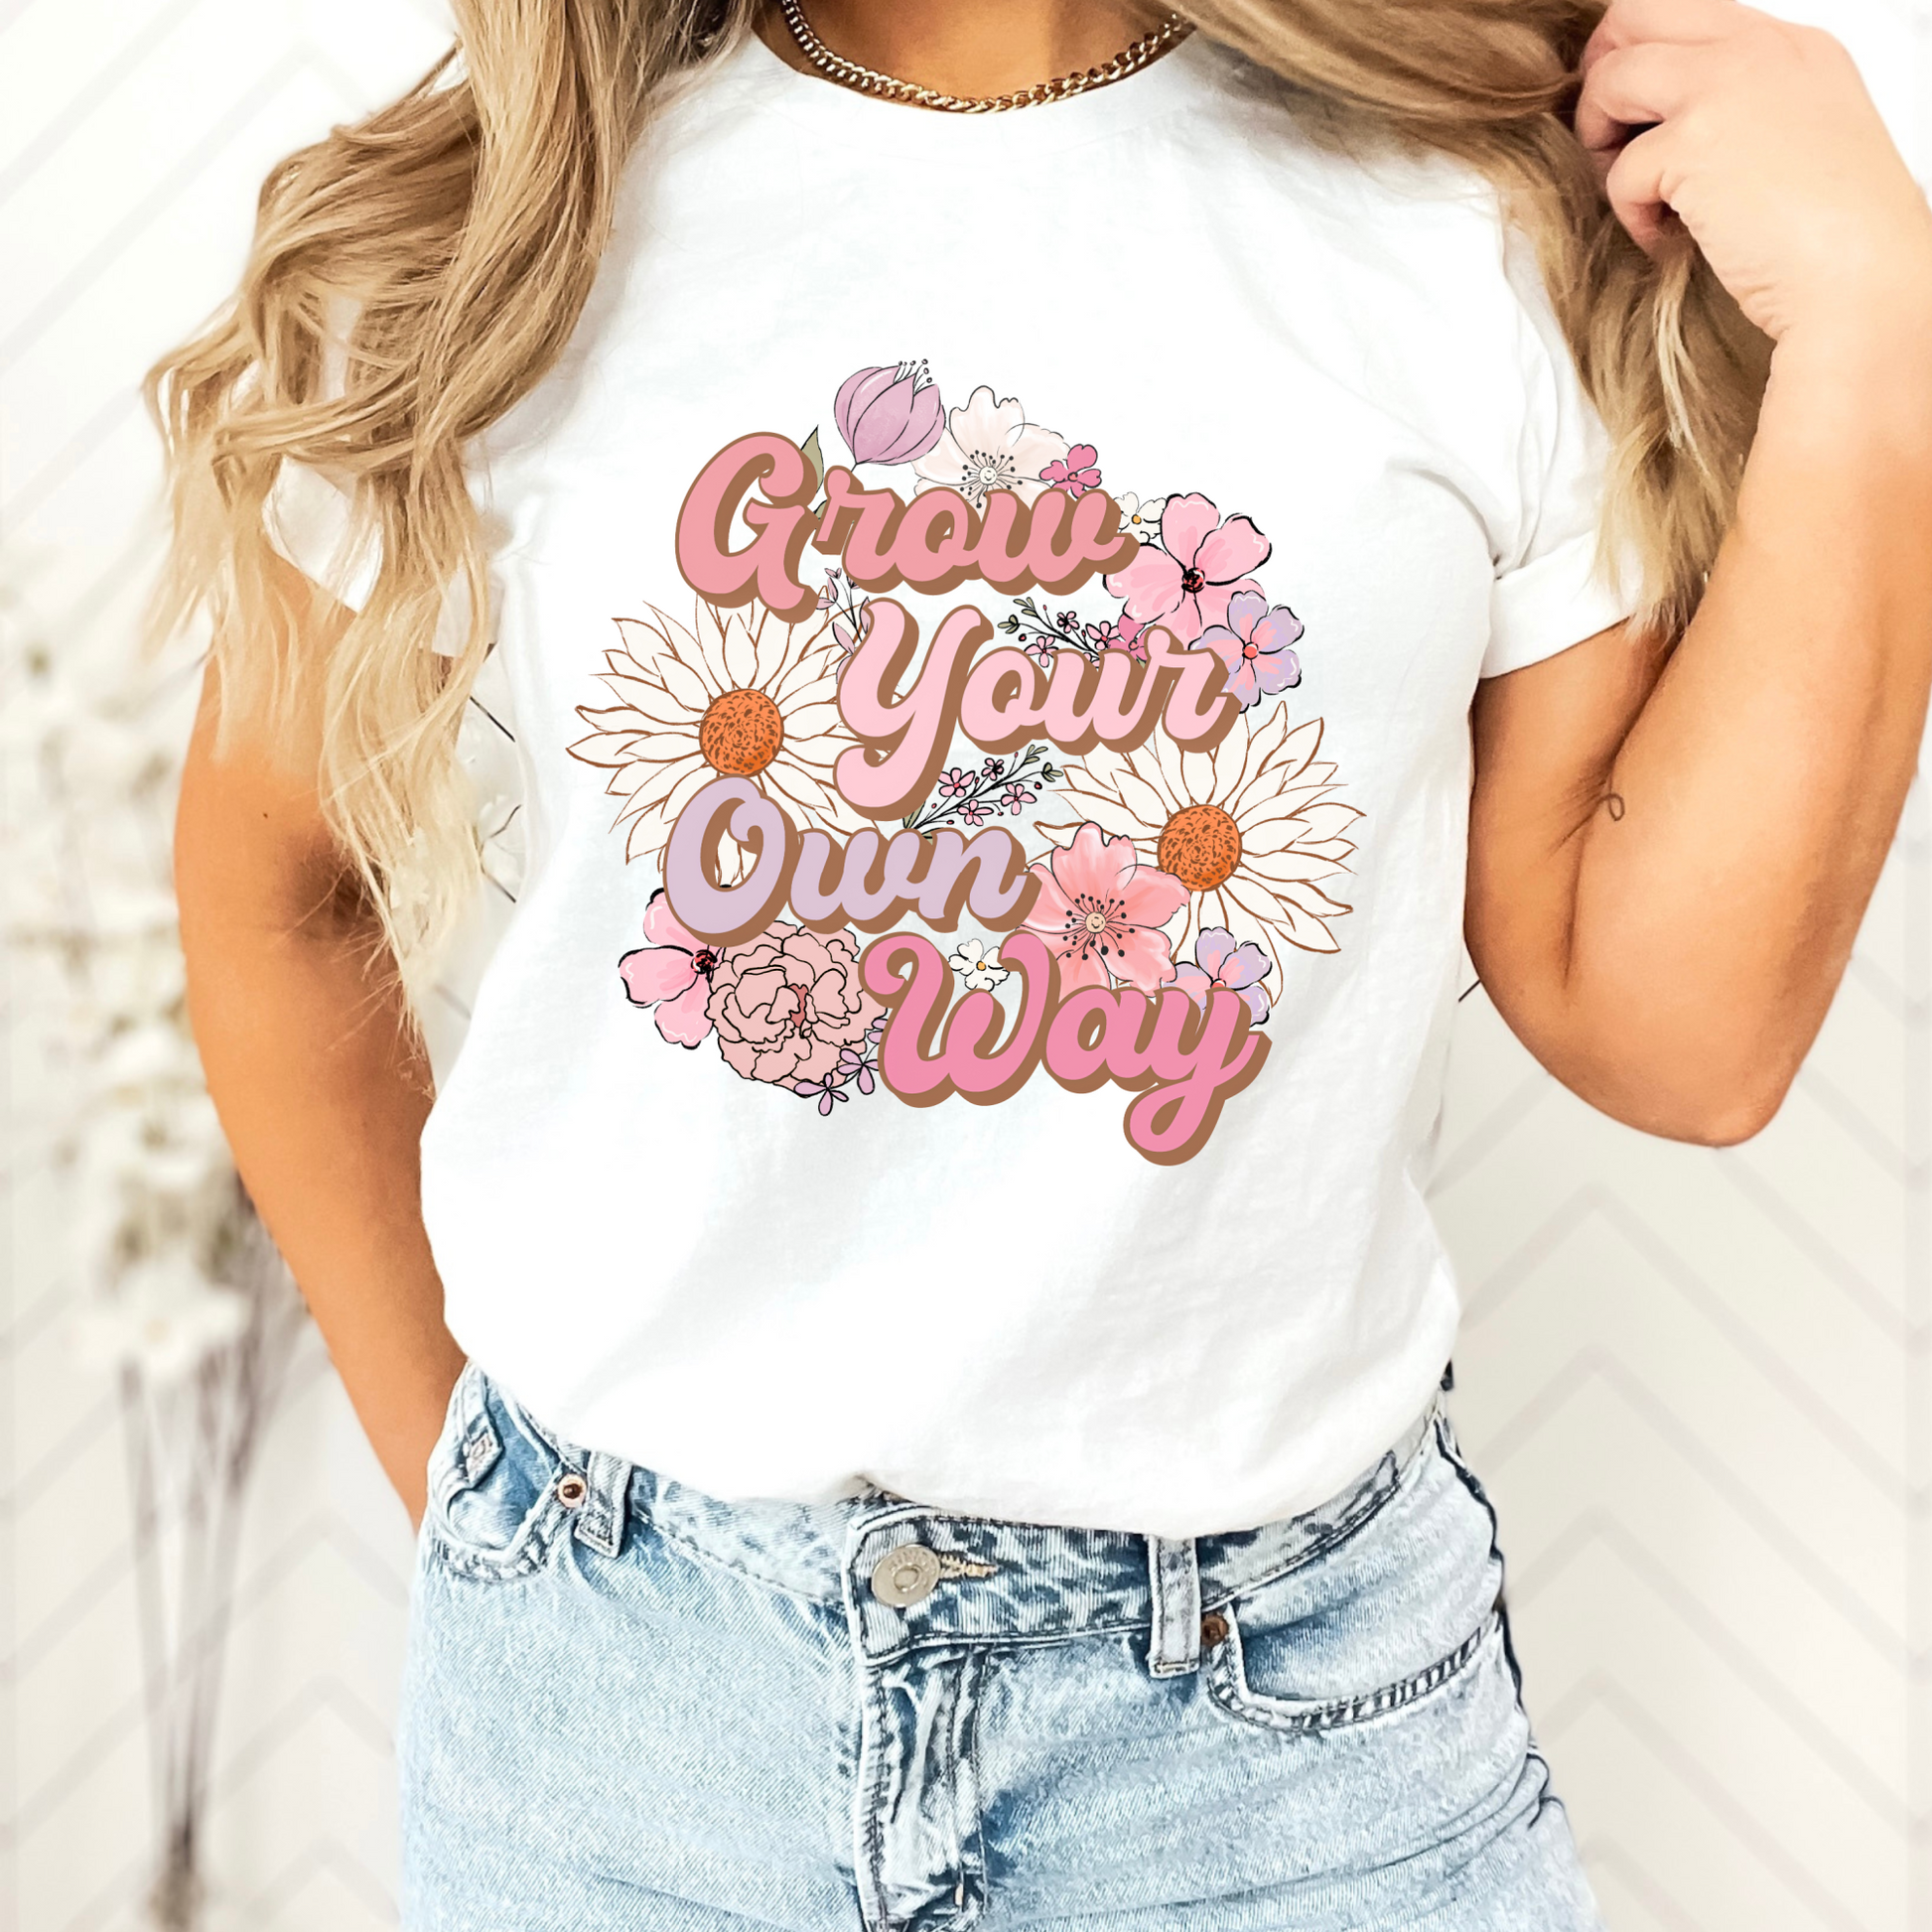 Pink and purple floral "Grown Your Own Way" Iron On Heat Transfer